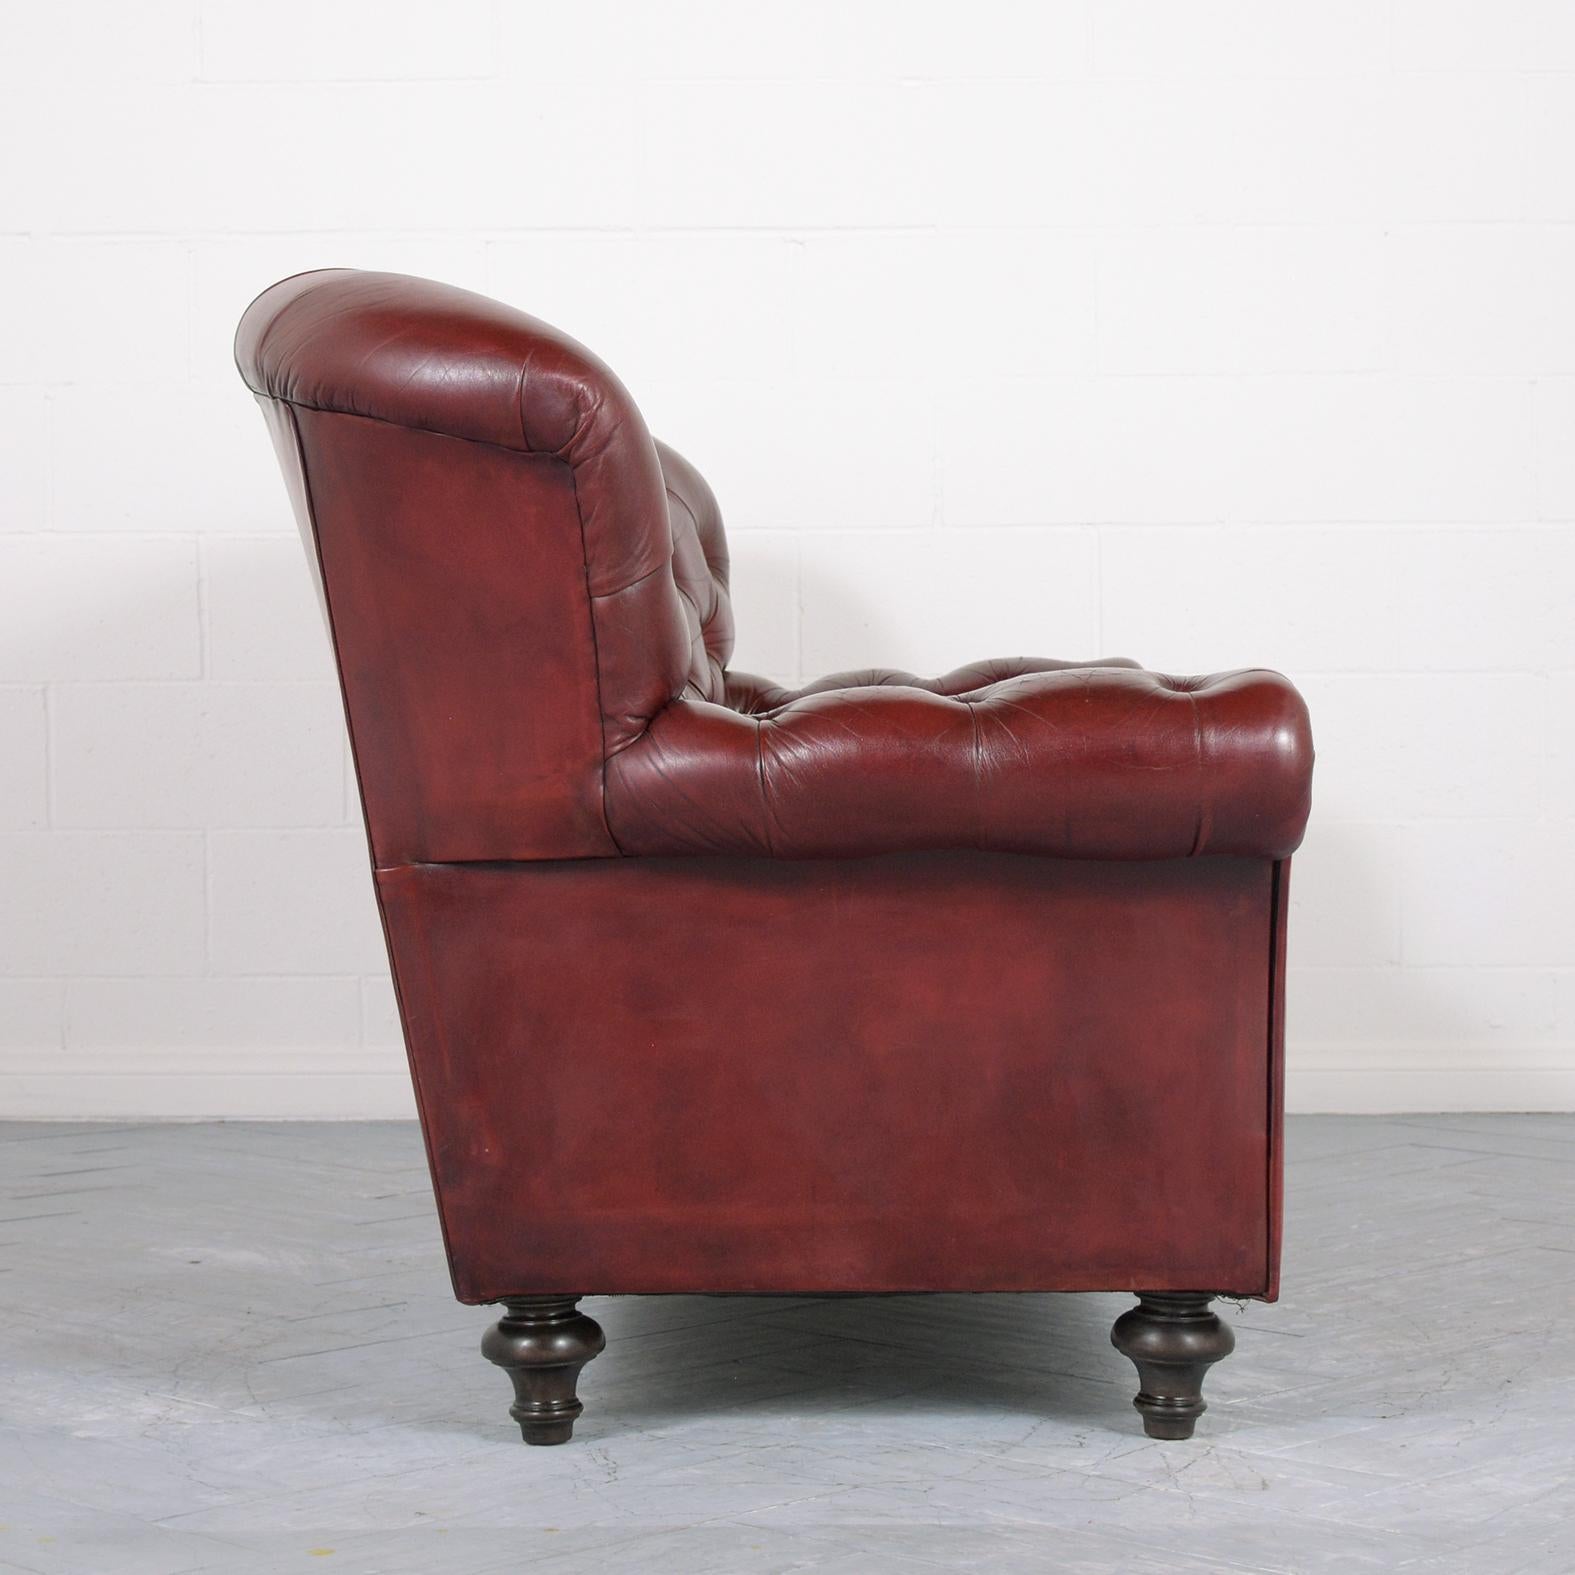 Leather Tufted Chesterfield Sofa 2